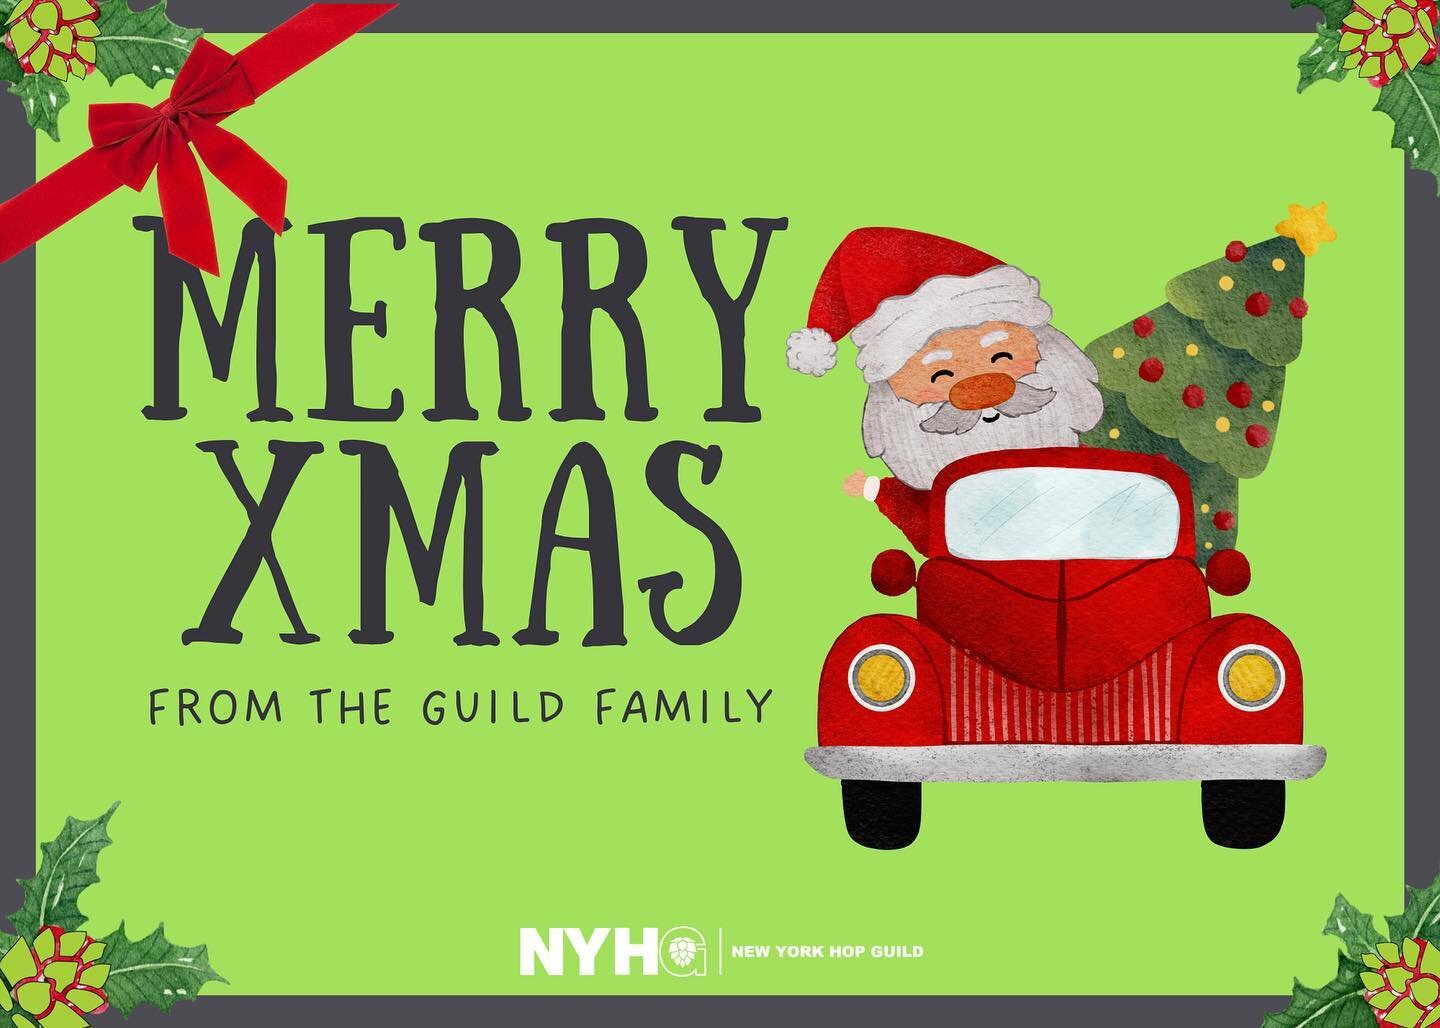 We wish everyone a Merry Christmas and a Happy Holiday! 

Our team will be off until Tuesday December 27th and we&rsquo;ll be shipping until December 29th next week! 
.
.
.
.
#hopguild #nyhopguild #fruitguild #nyhops #thinknydrinkny #winterhopland #c